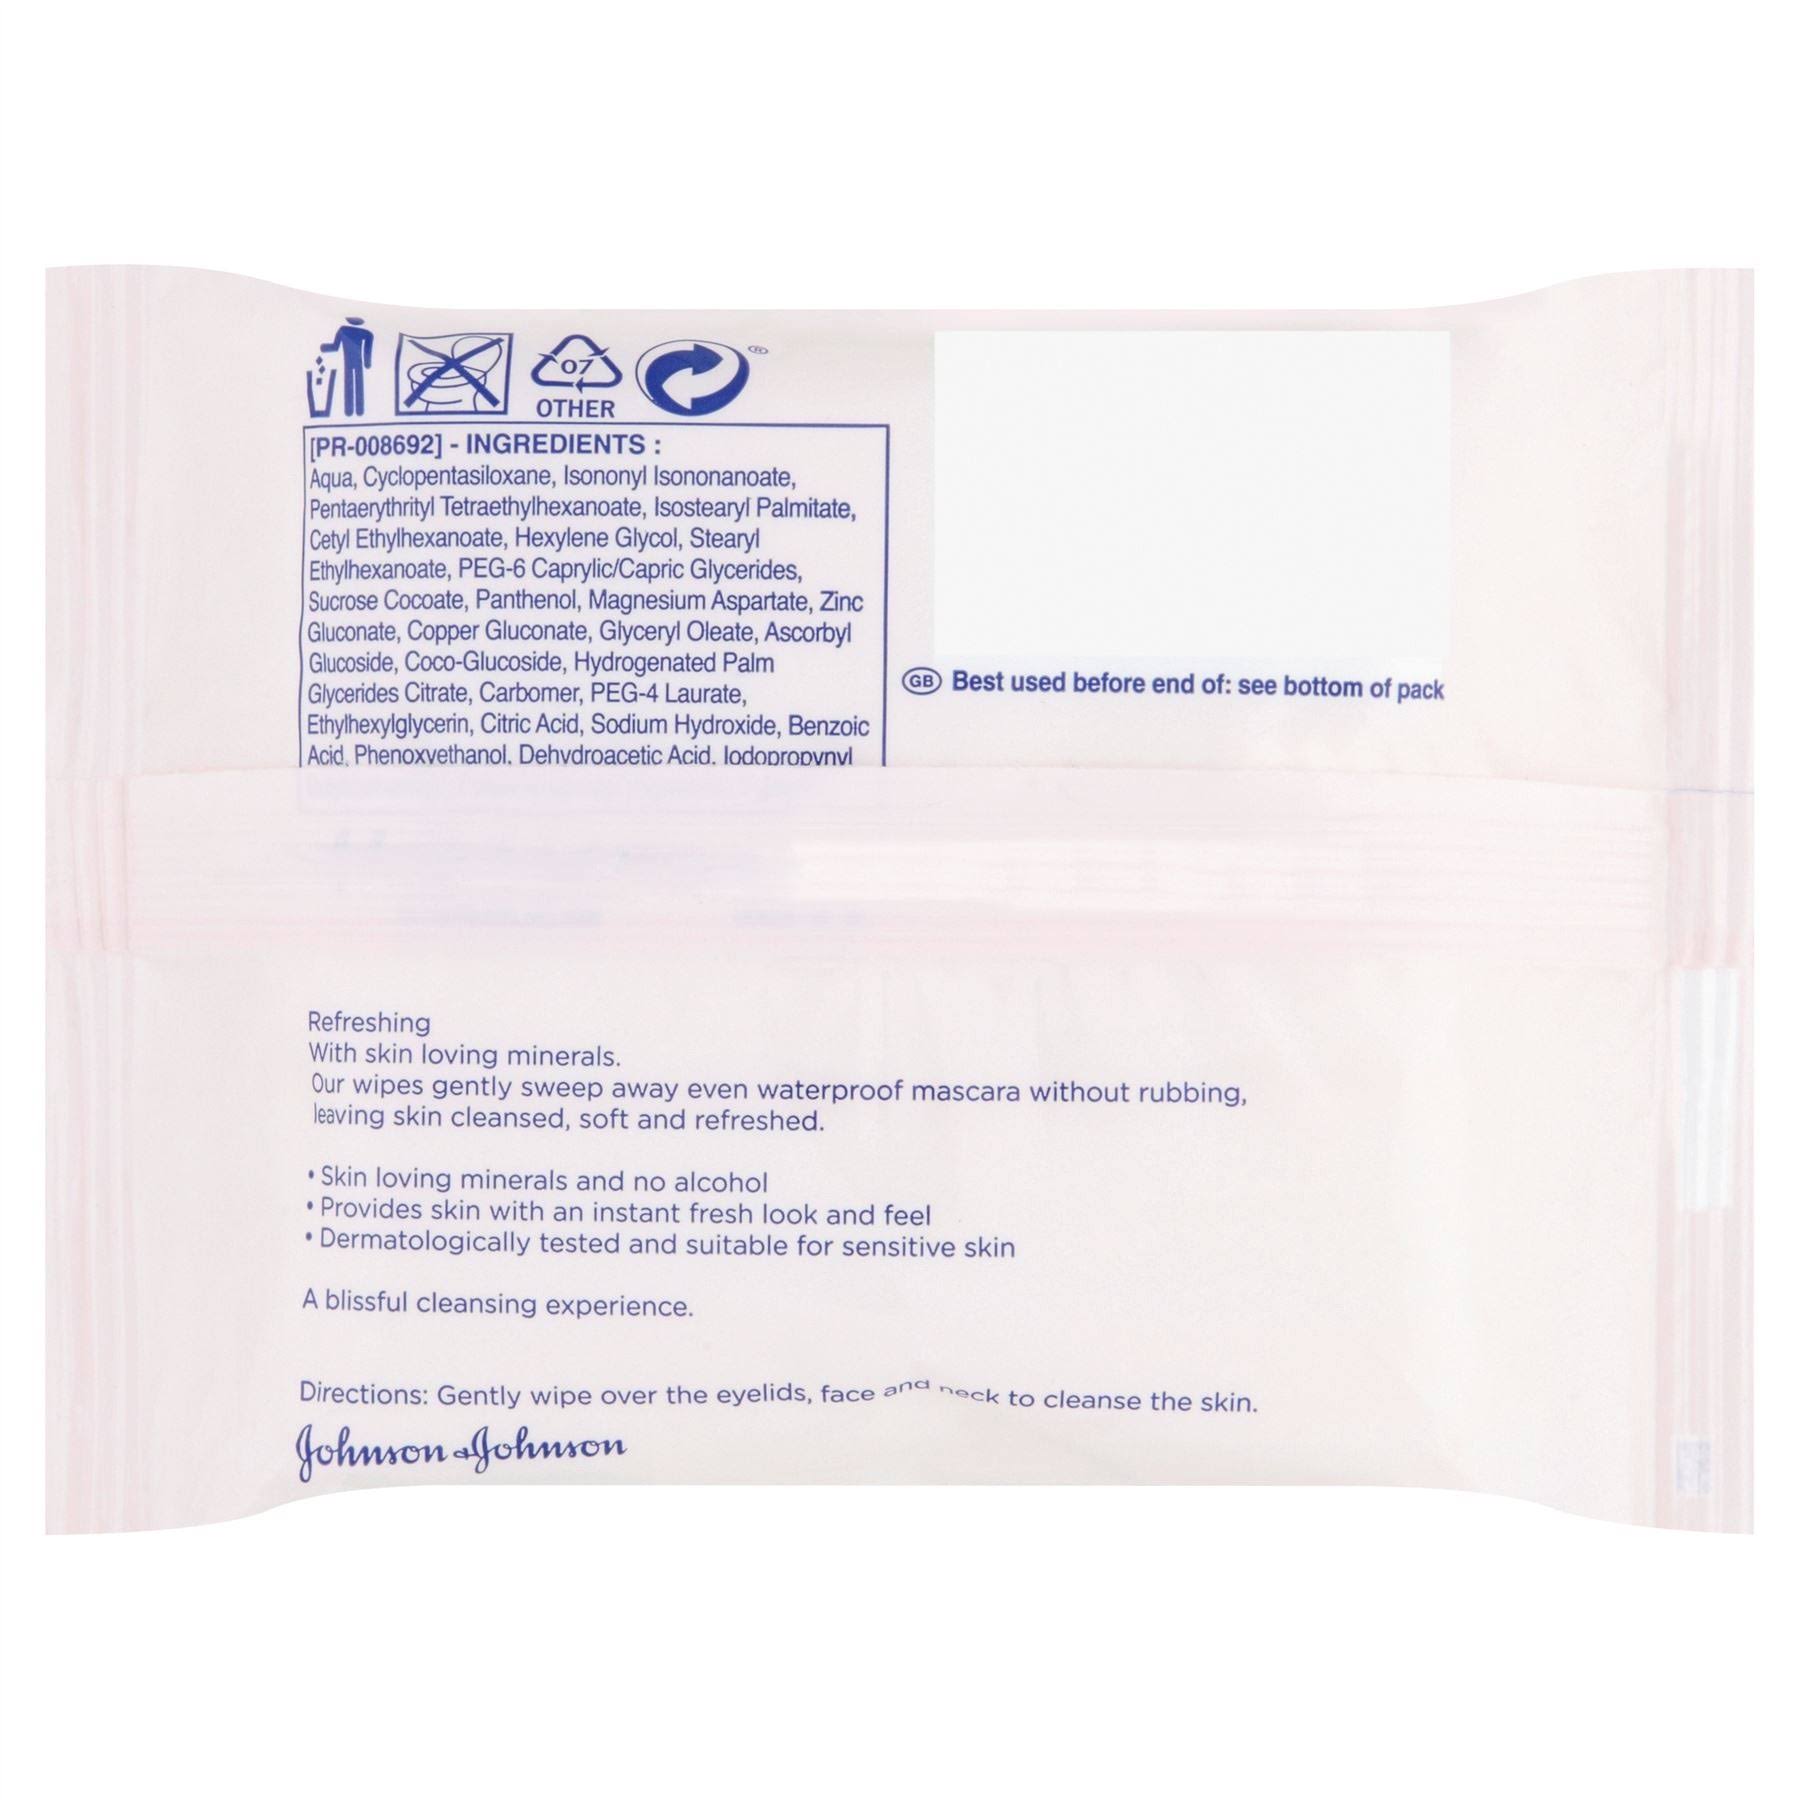 Johnsons Make Up Be Gone Cleansing Wipes - 25pcs